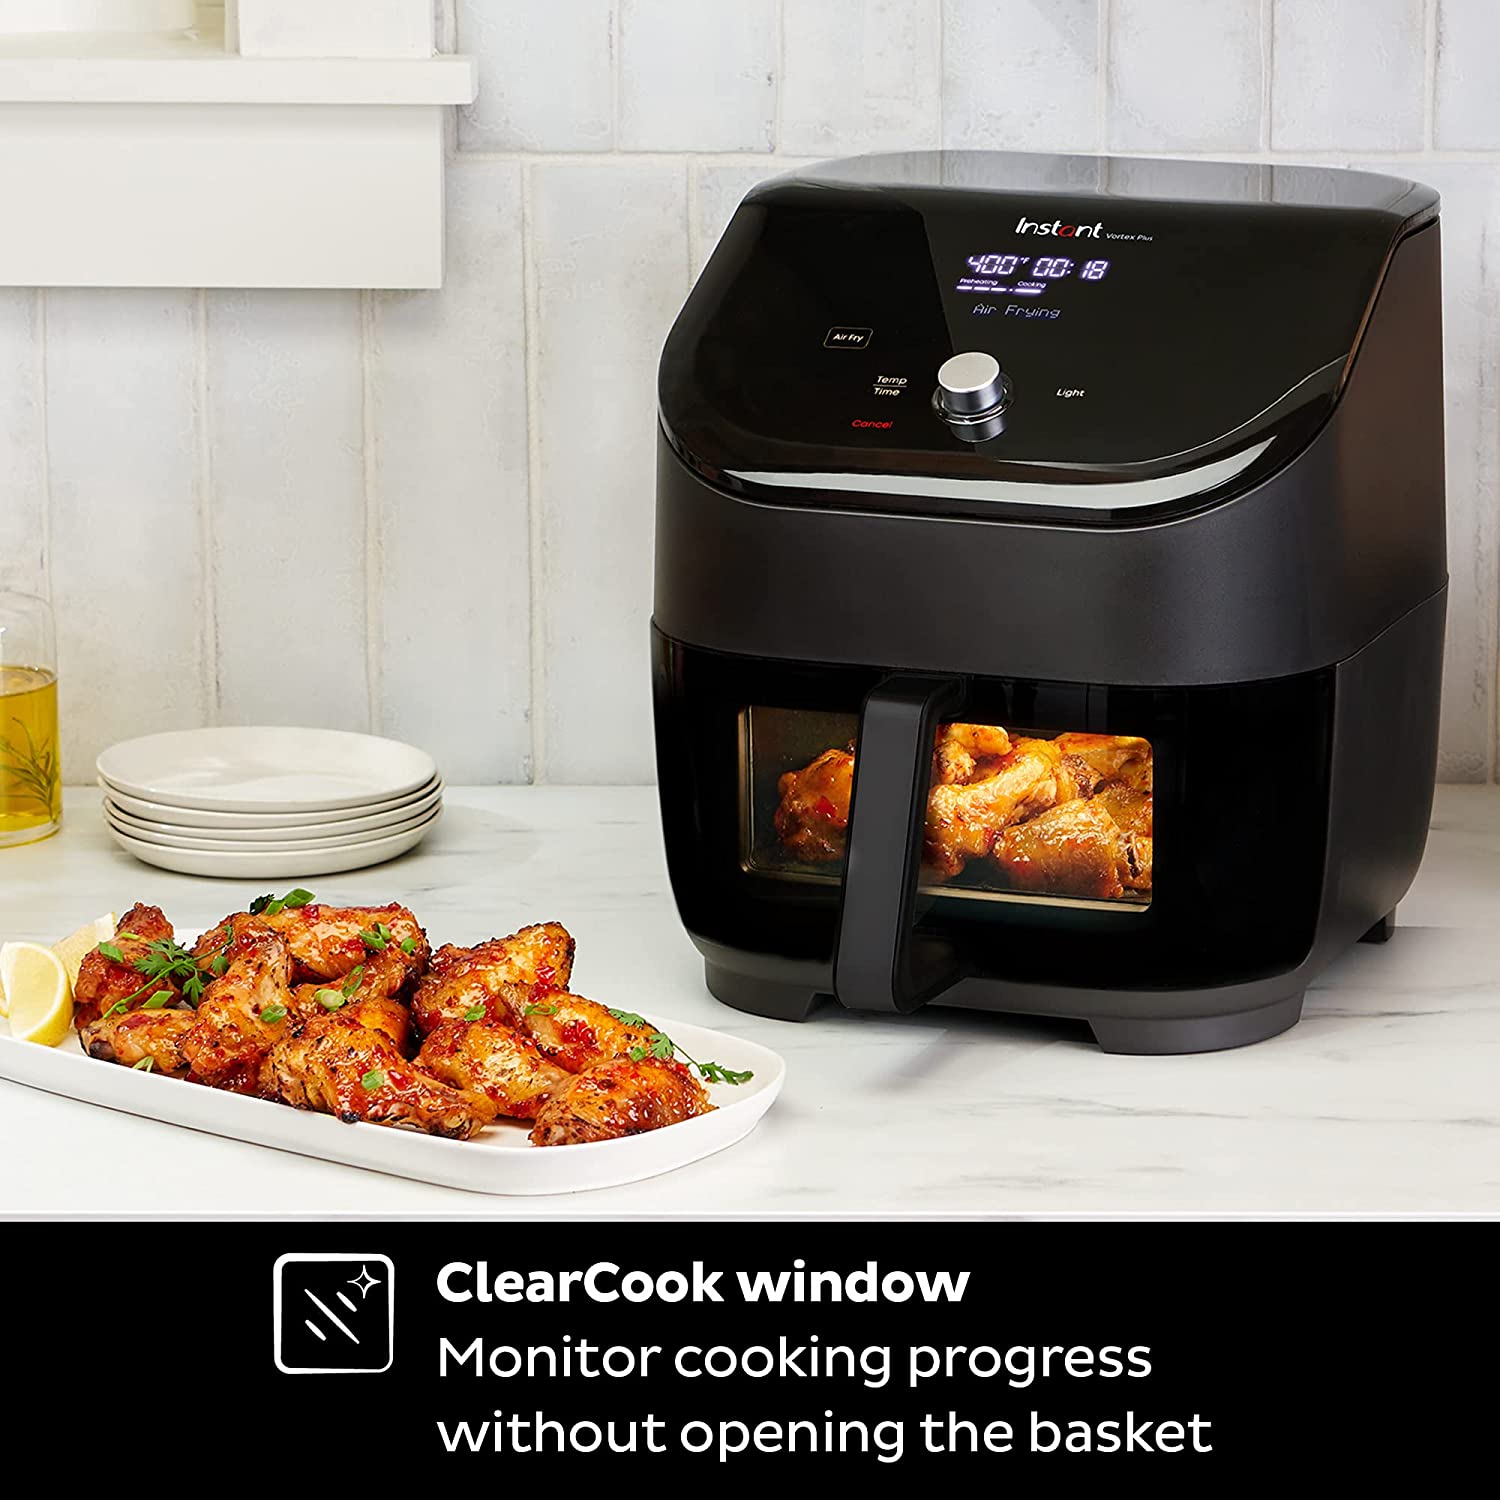 Instant Vortex Plus XL 8-quart Dual Basket Air Fryer Oven, From that Makers of Instant Pot, 2 Independent Frying Baskets, ClearCook Windows, Dishwasher-Safe Baskets, App with over 100 Recipes